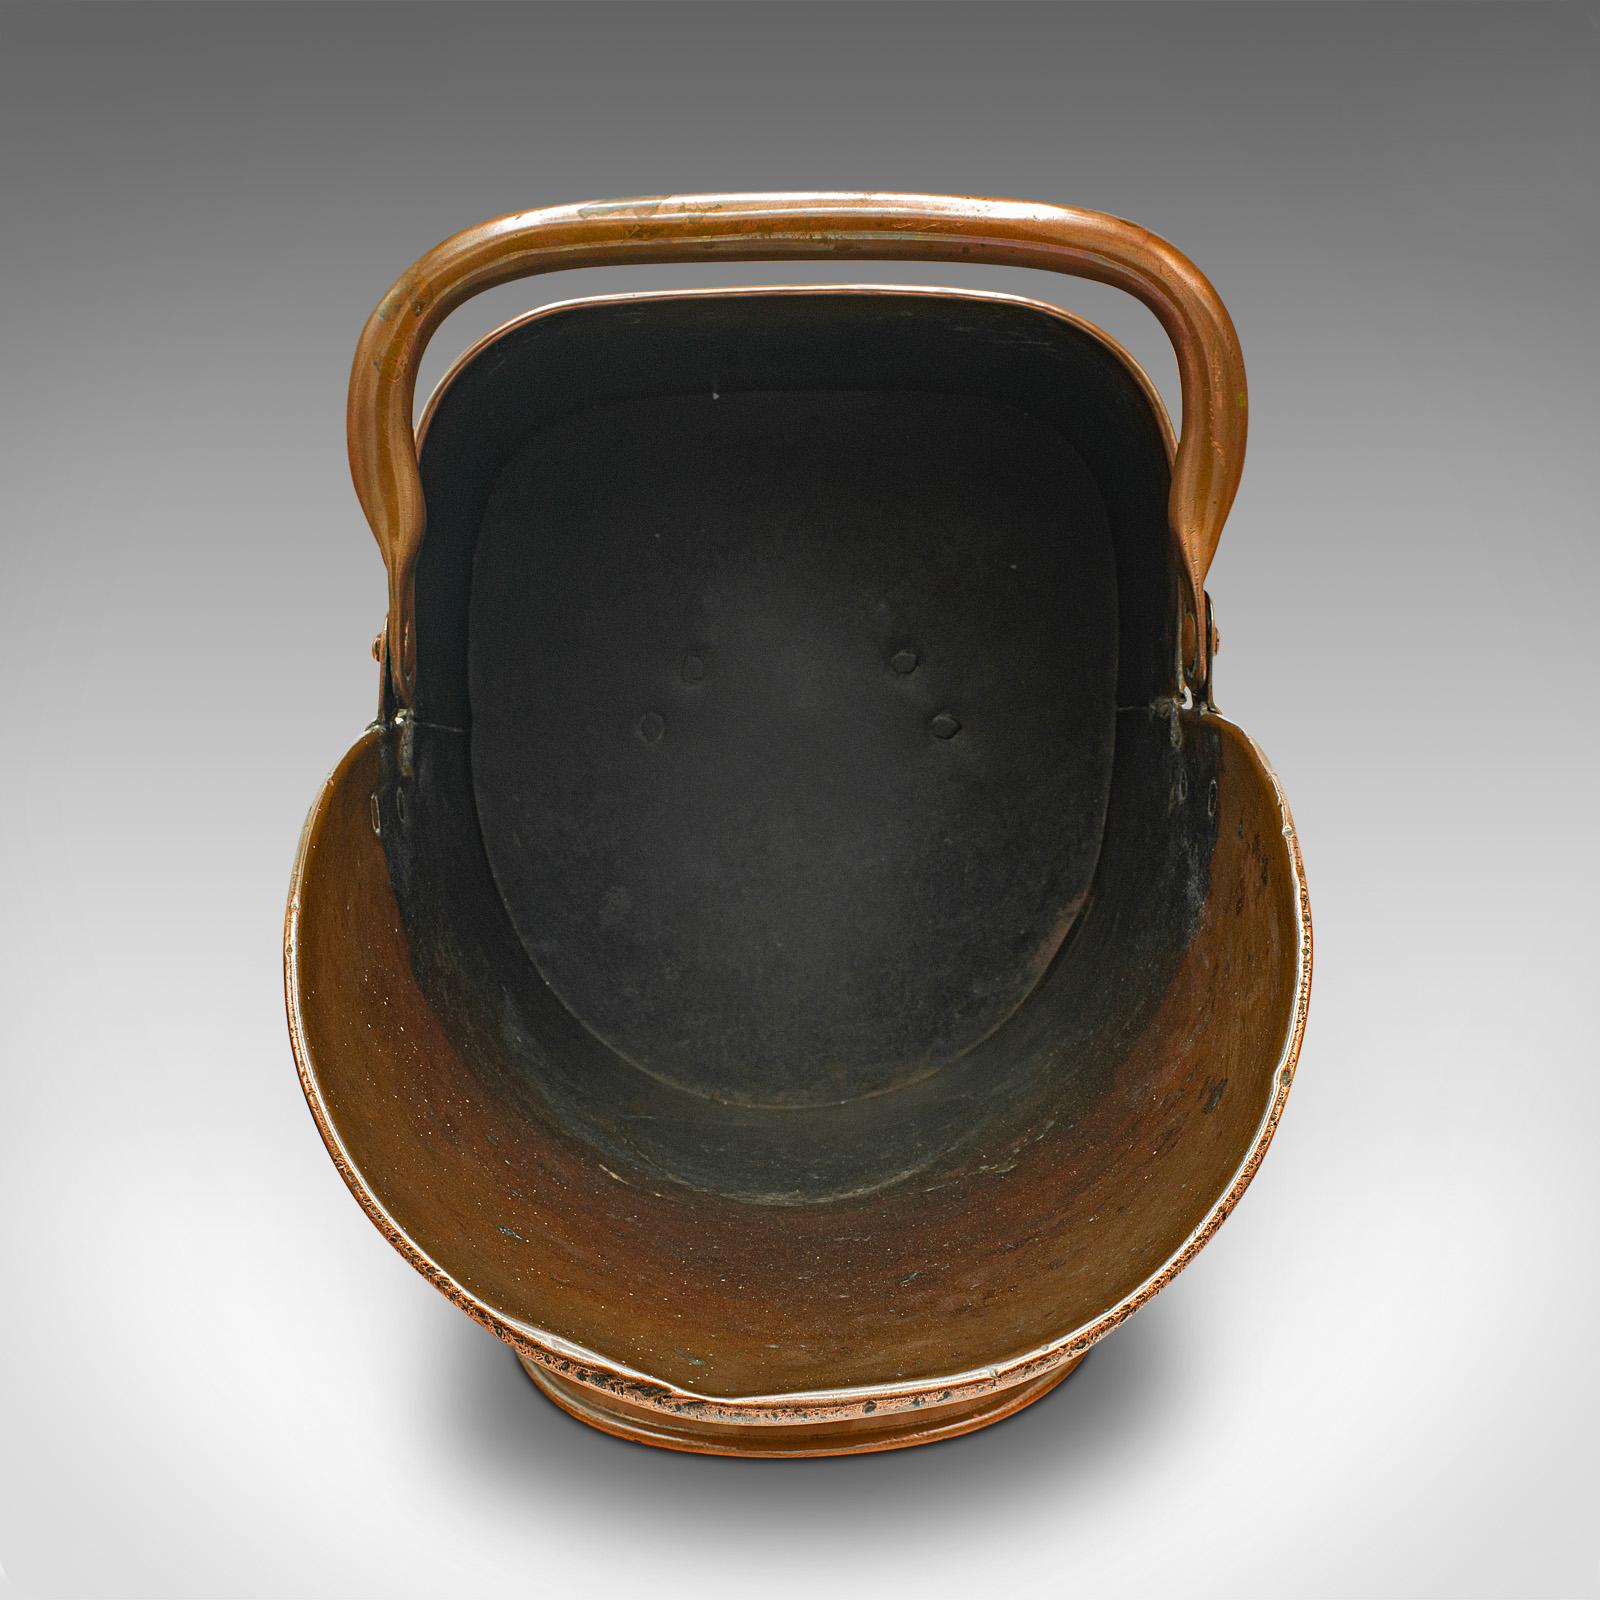 This is an antique helmet scuttle. An English, copper fireside coal or log bucket, dating to the late Victorian period, circa 1900.

Attractive fireside helmet scuttle with great finish
Displays a desirable aged patina throughout
Delightfully